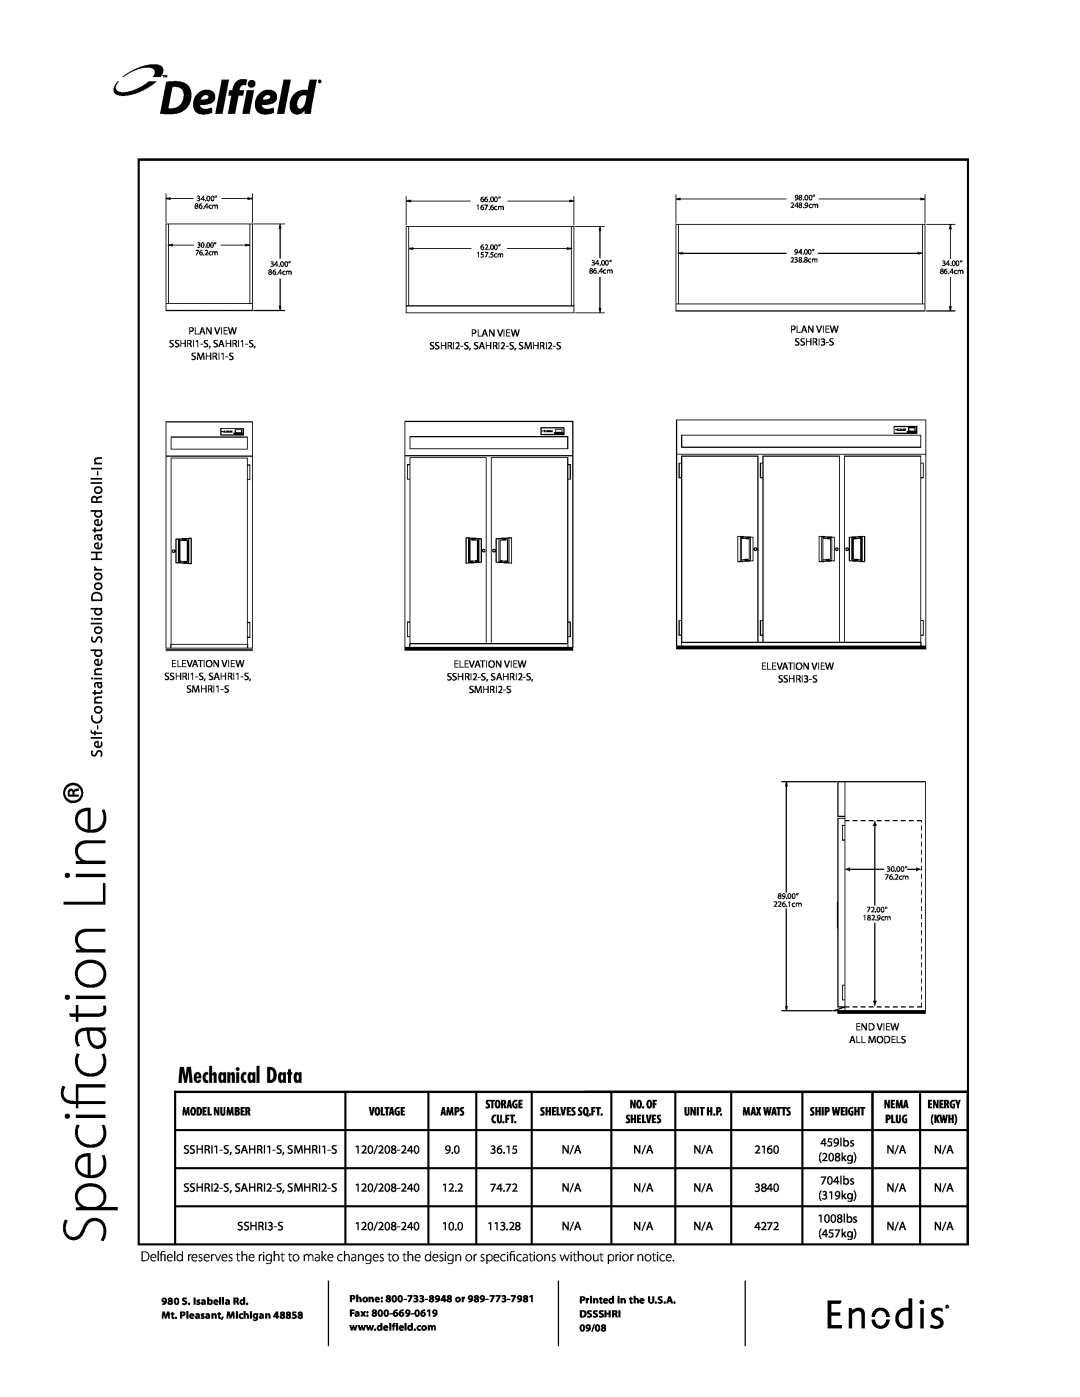 Delfield SAHRI1-S Specification, Delfield, Mechanical Data, Line Self-ContainedSolid Door Heated Roll-In, Model Number 